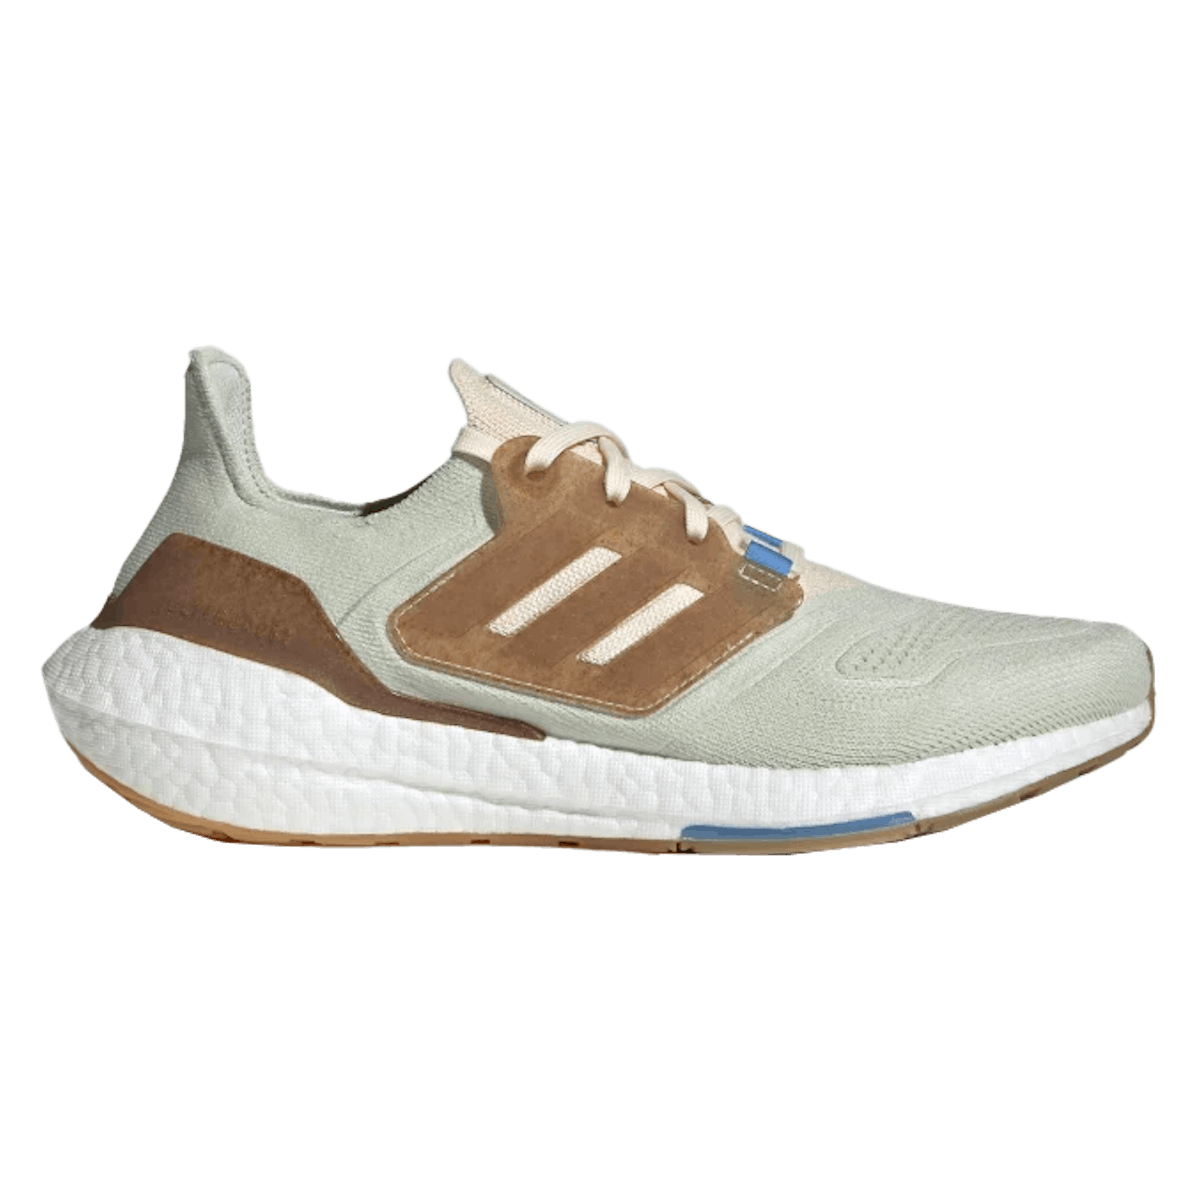 Adidas UltraBoost 22 Made With Nature "Linen Green"